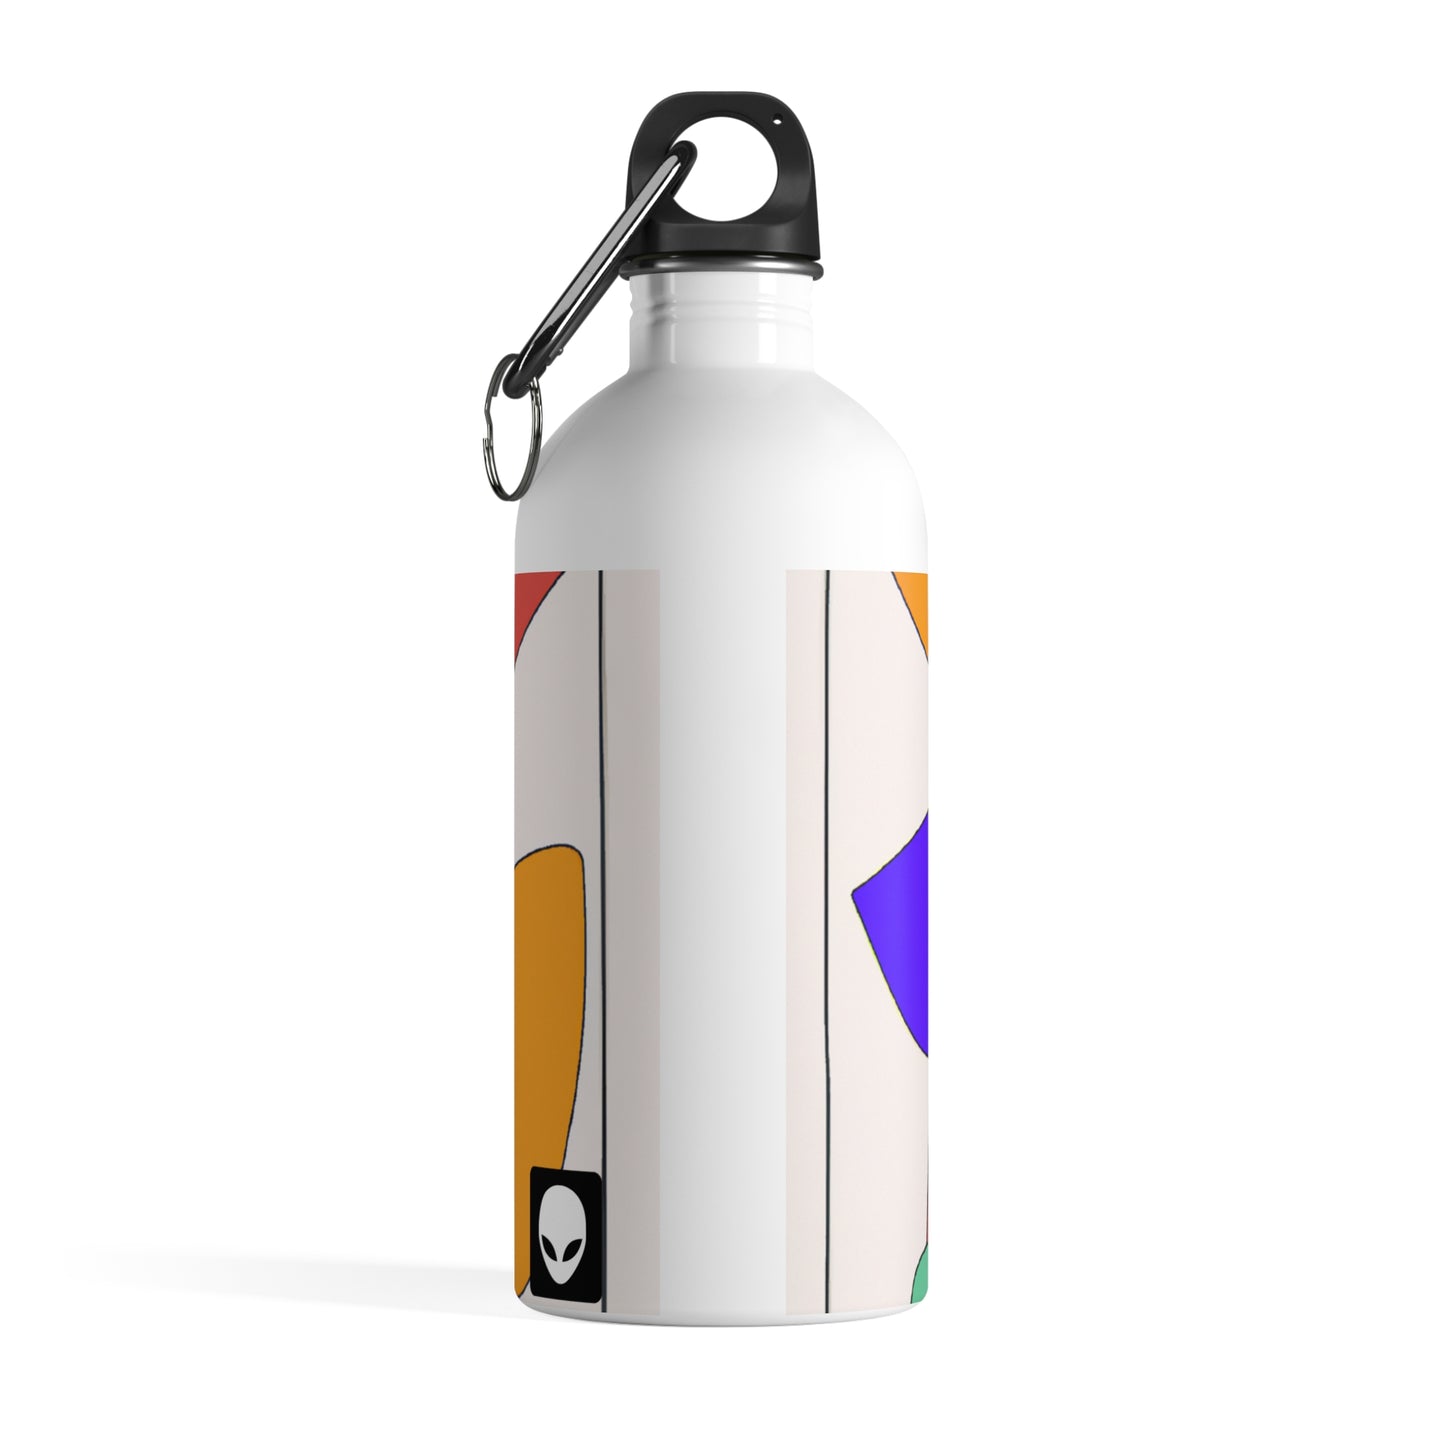 "A Beacon of Hope" - The Alien Stainless Steel Water Bottle